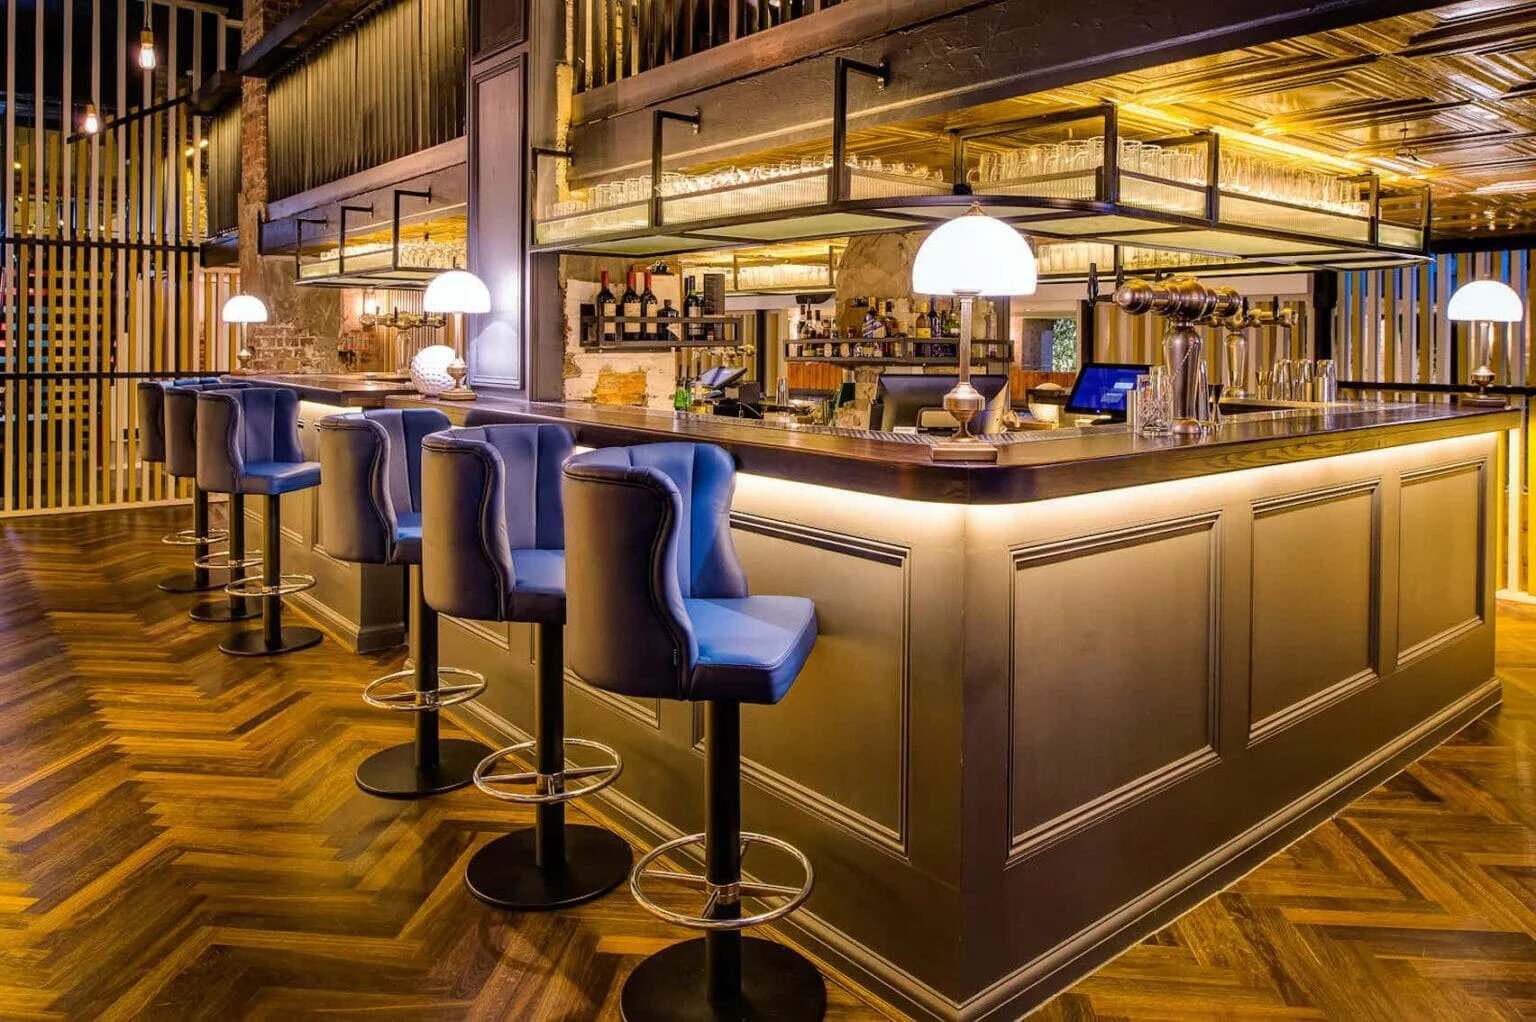 In a gold-lit room with shiny wooden floors, blue barstool chairs are lined up alongside a well-stocked bar.